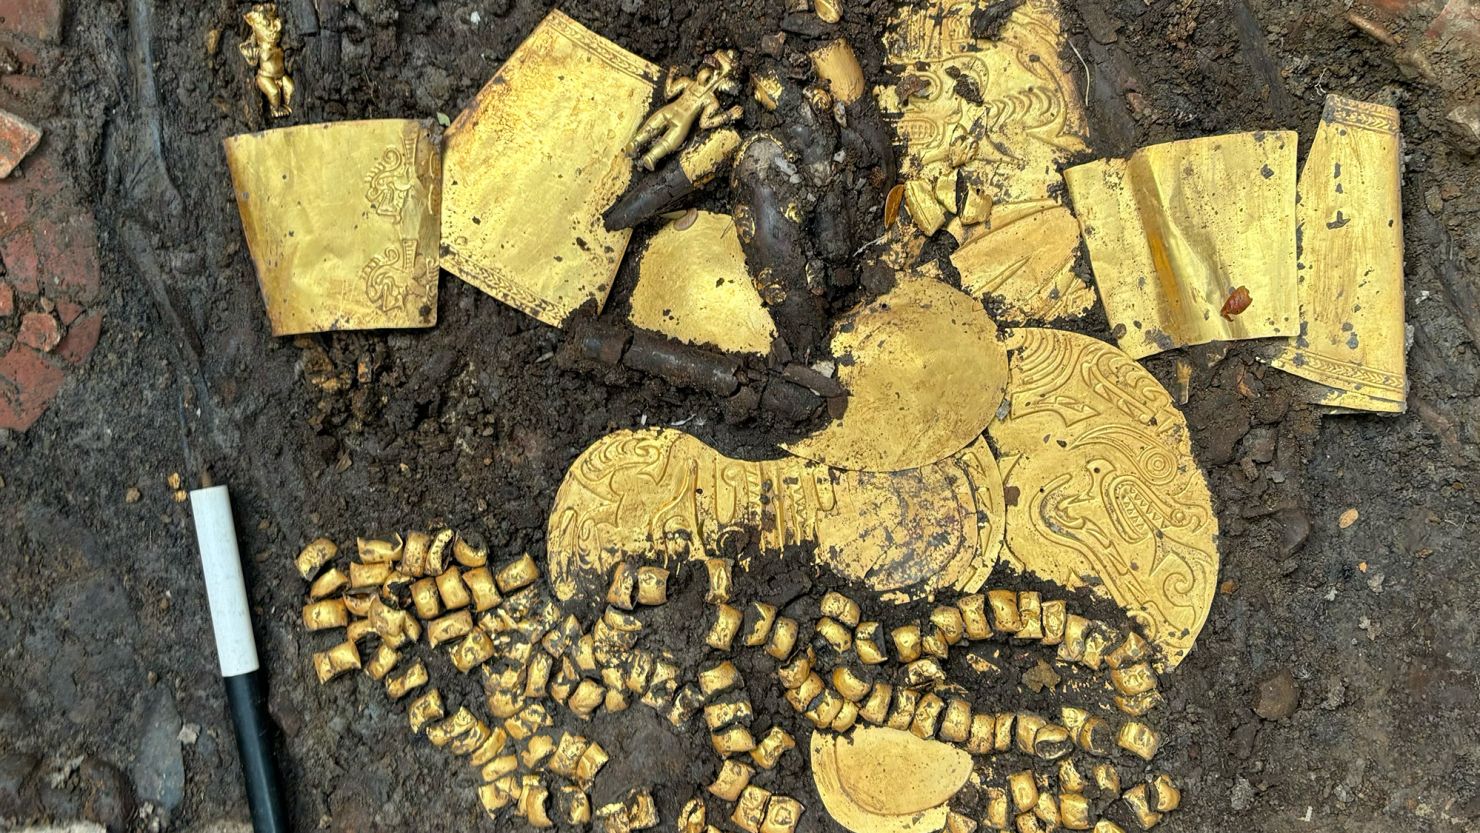 Archaeologists in El Caño, a town in Panama's Coclé province, uncovered the tomb of an ancient leader filled with gold breastplates, belts and necklaces, as well as earrings in the form of human figures.